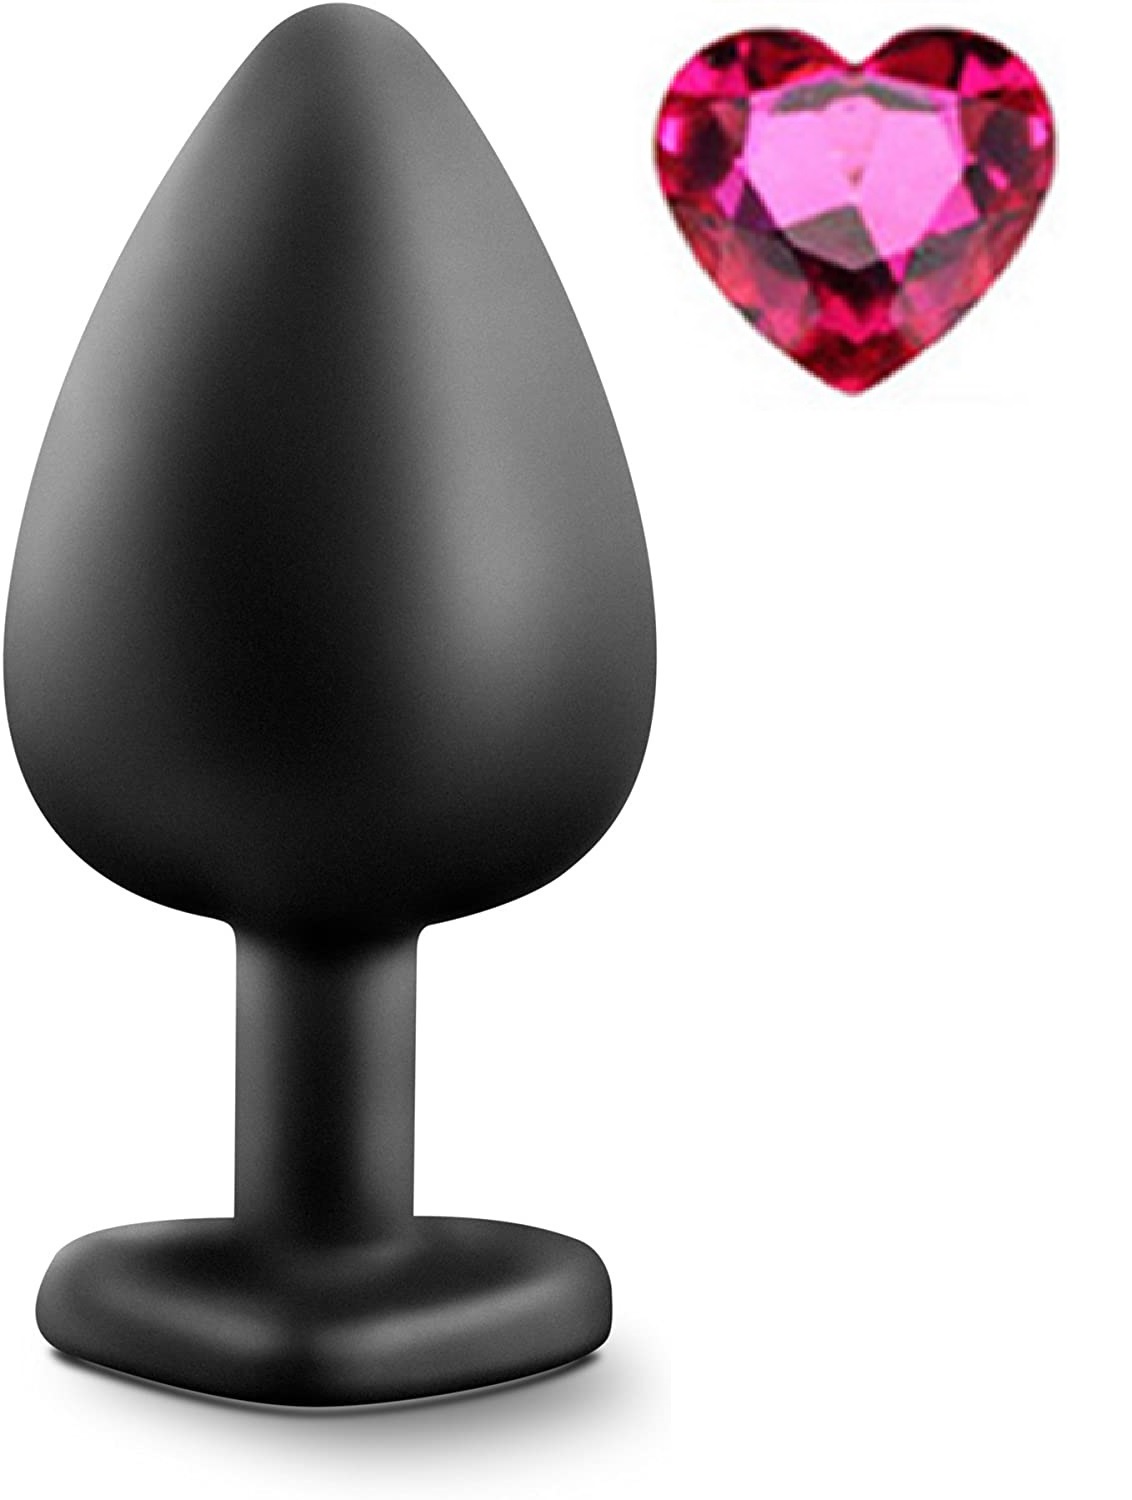 Dop Anal Glammy Large Silicon Negru/Roz Guilty Toys